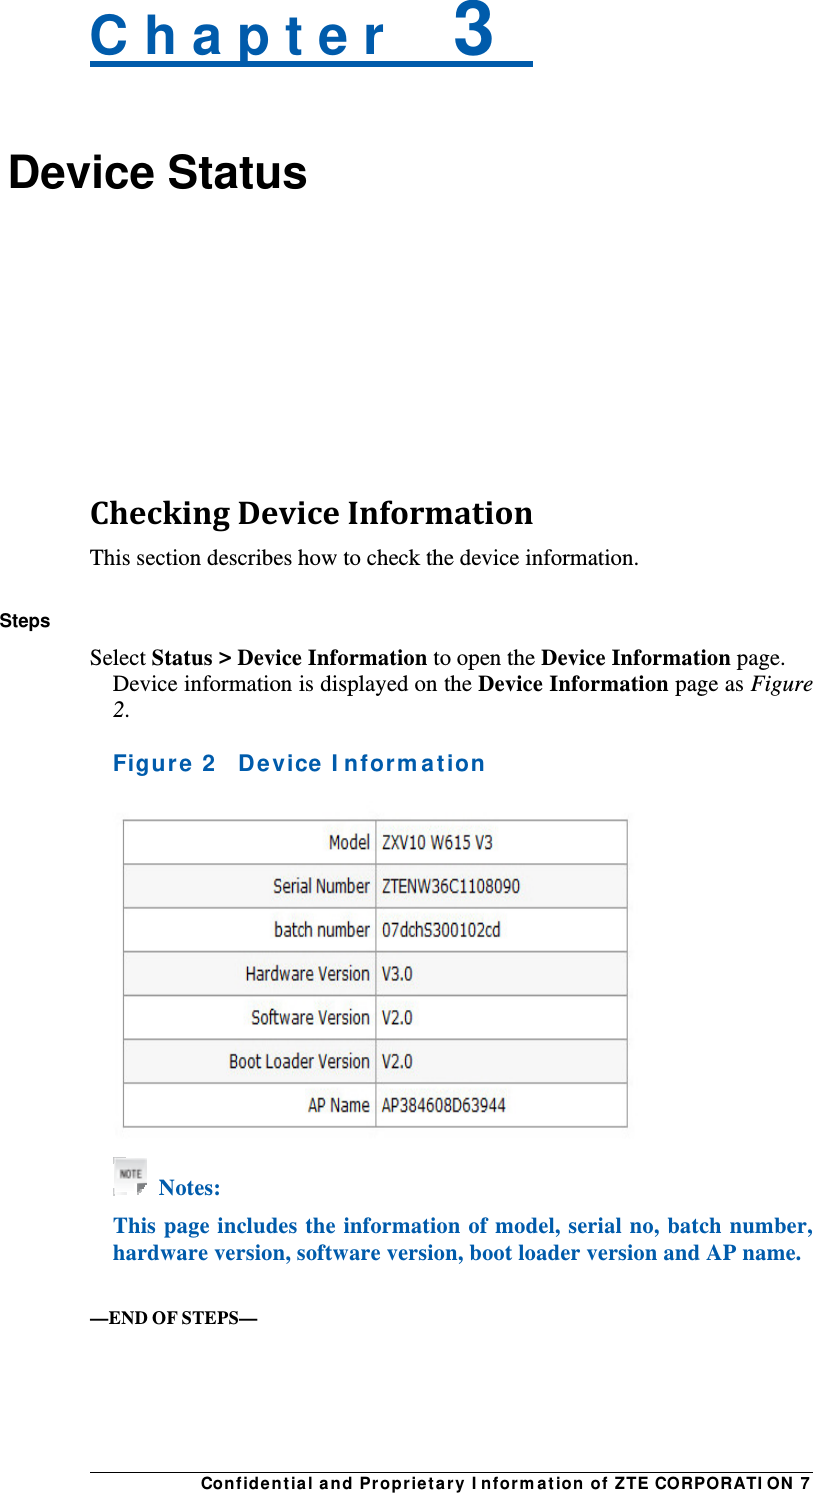 Con fidentia l and Proprieta r y I nform a t ion of ZTE CORPORATI ON 7 C h a p t e r    3   Device Status    CheckingDeviceInformationThis section describes how to check the device information.  Steps Select Status &gt; Device Information to open the Device Information page. Device information is displayed on the Device Information page as Figure 2.  Figure  2    Device I nfor m at ion    Notes: This page includes the information of model, serial no, batch number, hardware version, software version, boot loader version and AP name.   —END OF STEPS— 